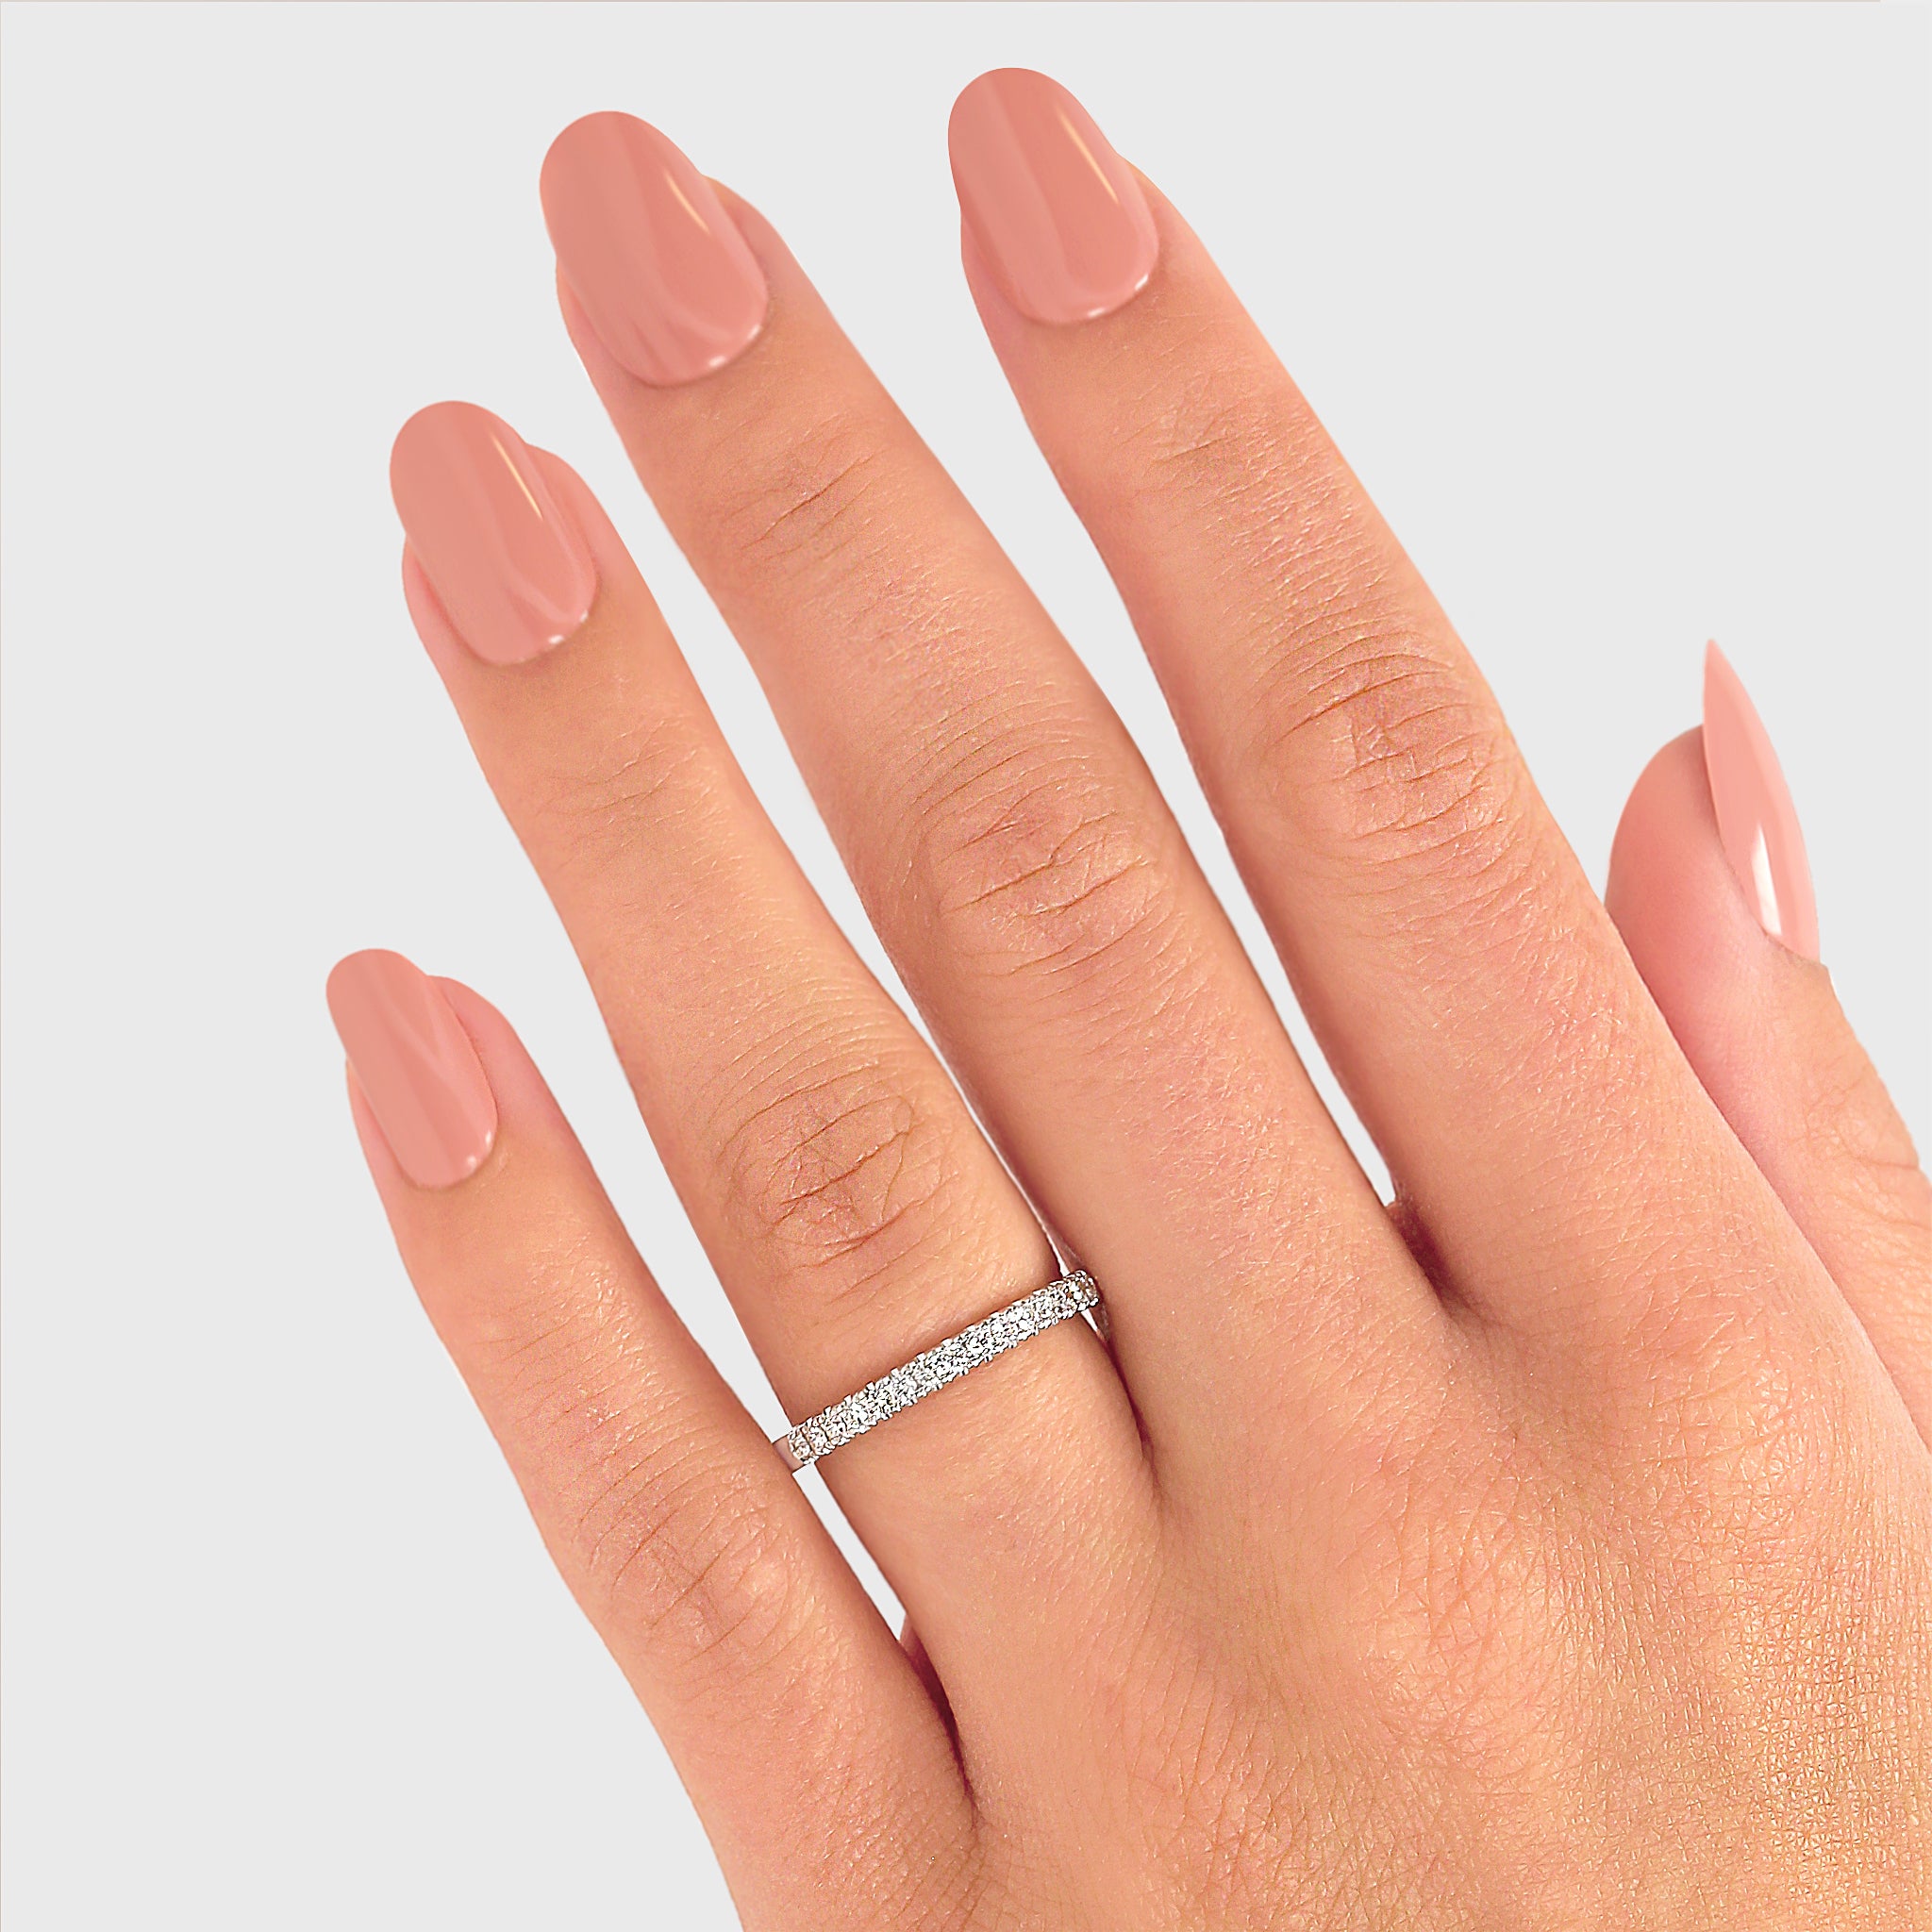 Shimansky - Women Wearing the Ladies Diamond Wedding Band Crafted in 18K White Gold